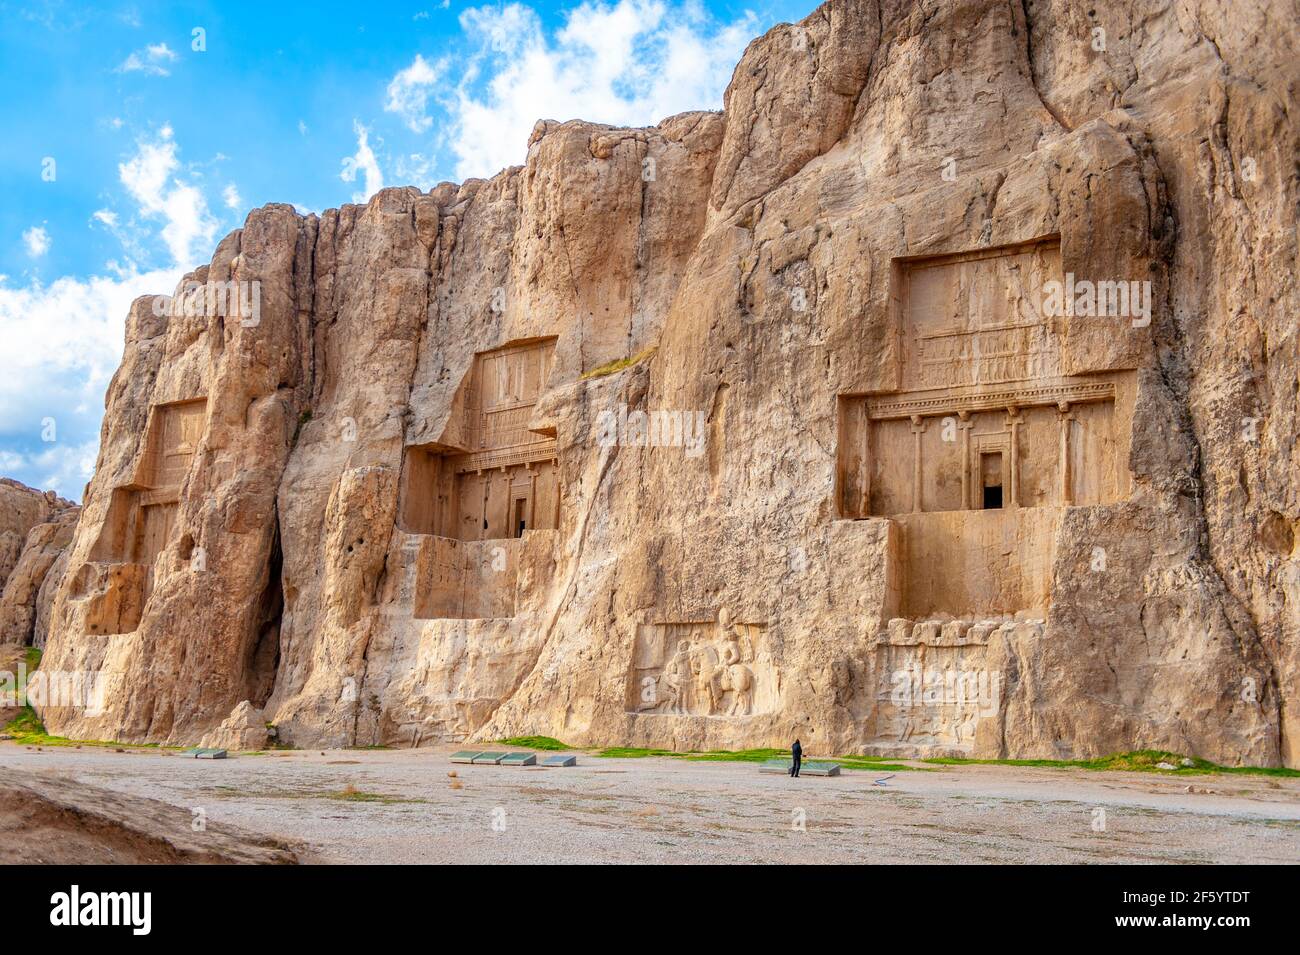 Naqsh-e Rostam, an ancient necropolis with tombs of Persian great kings located near Persepolis in Iran Stock Photo